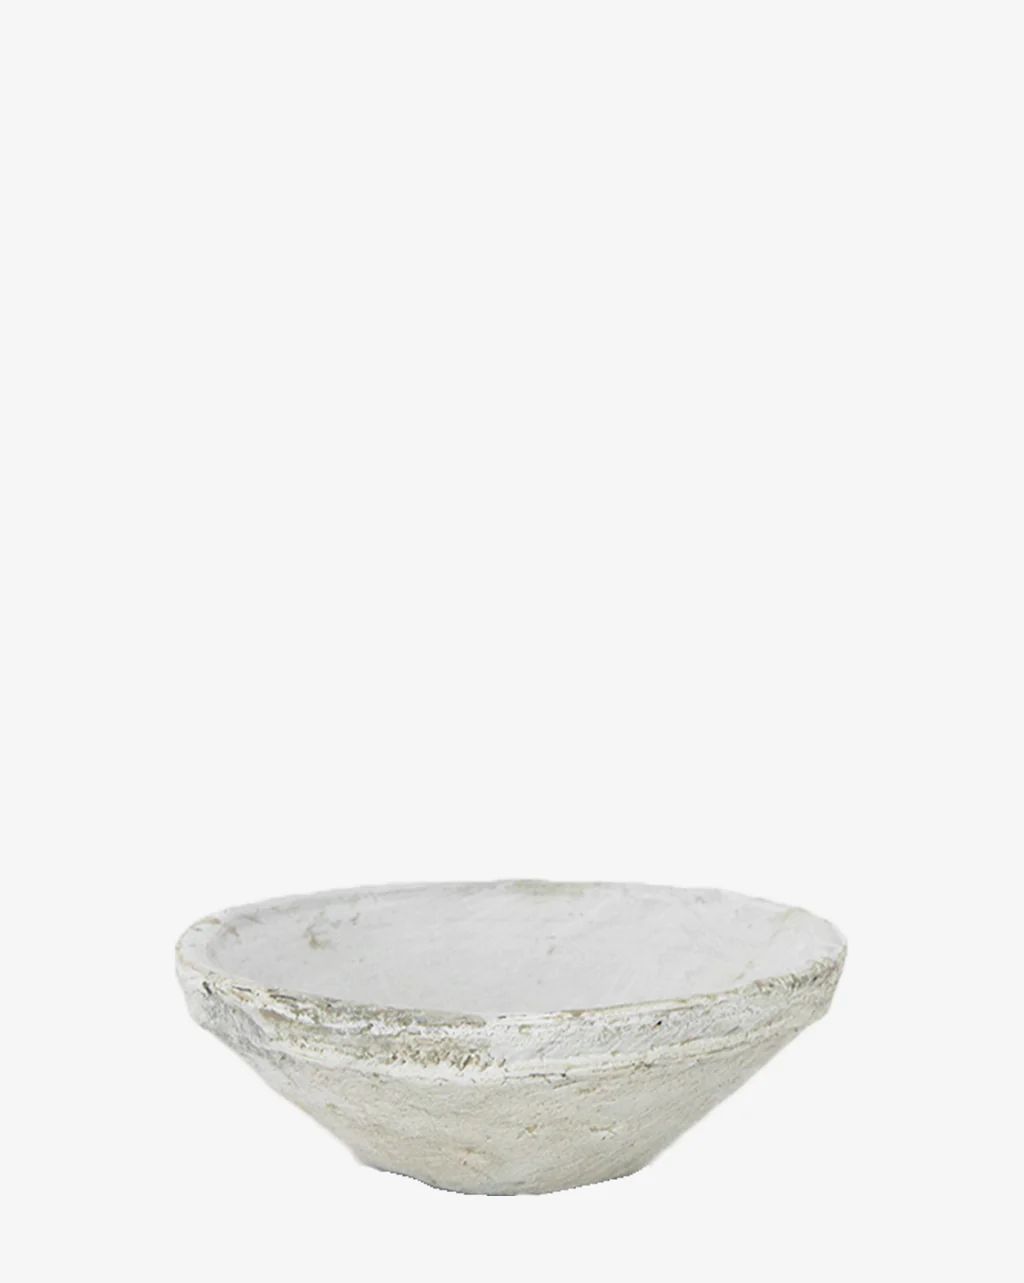 Distressed Terracotta Bowl | McGee & Co.